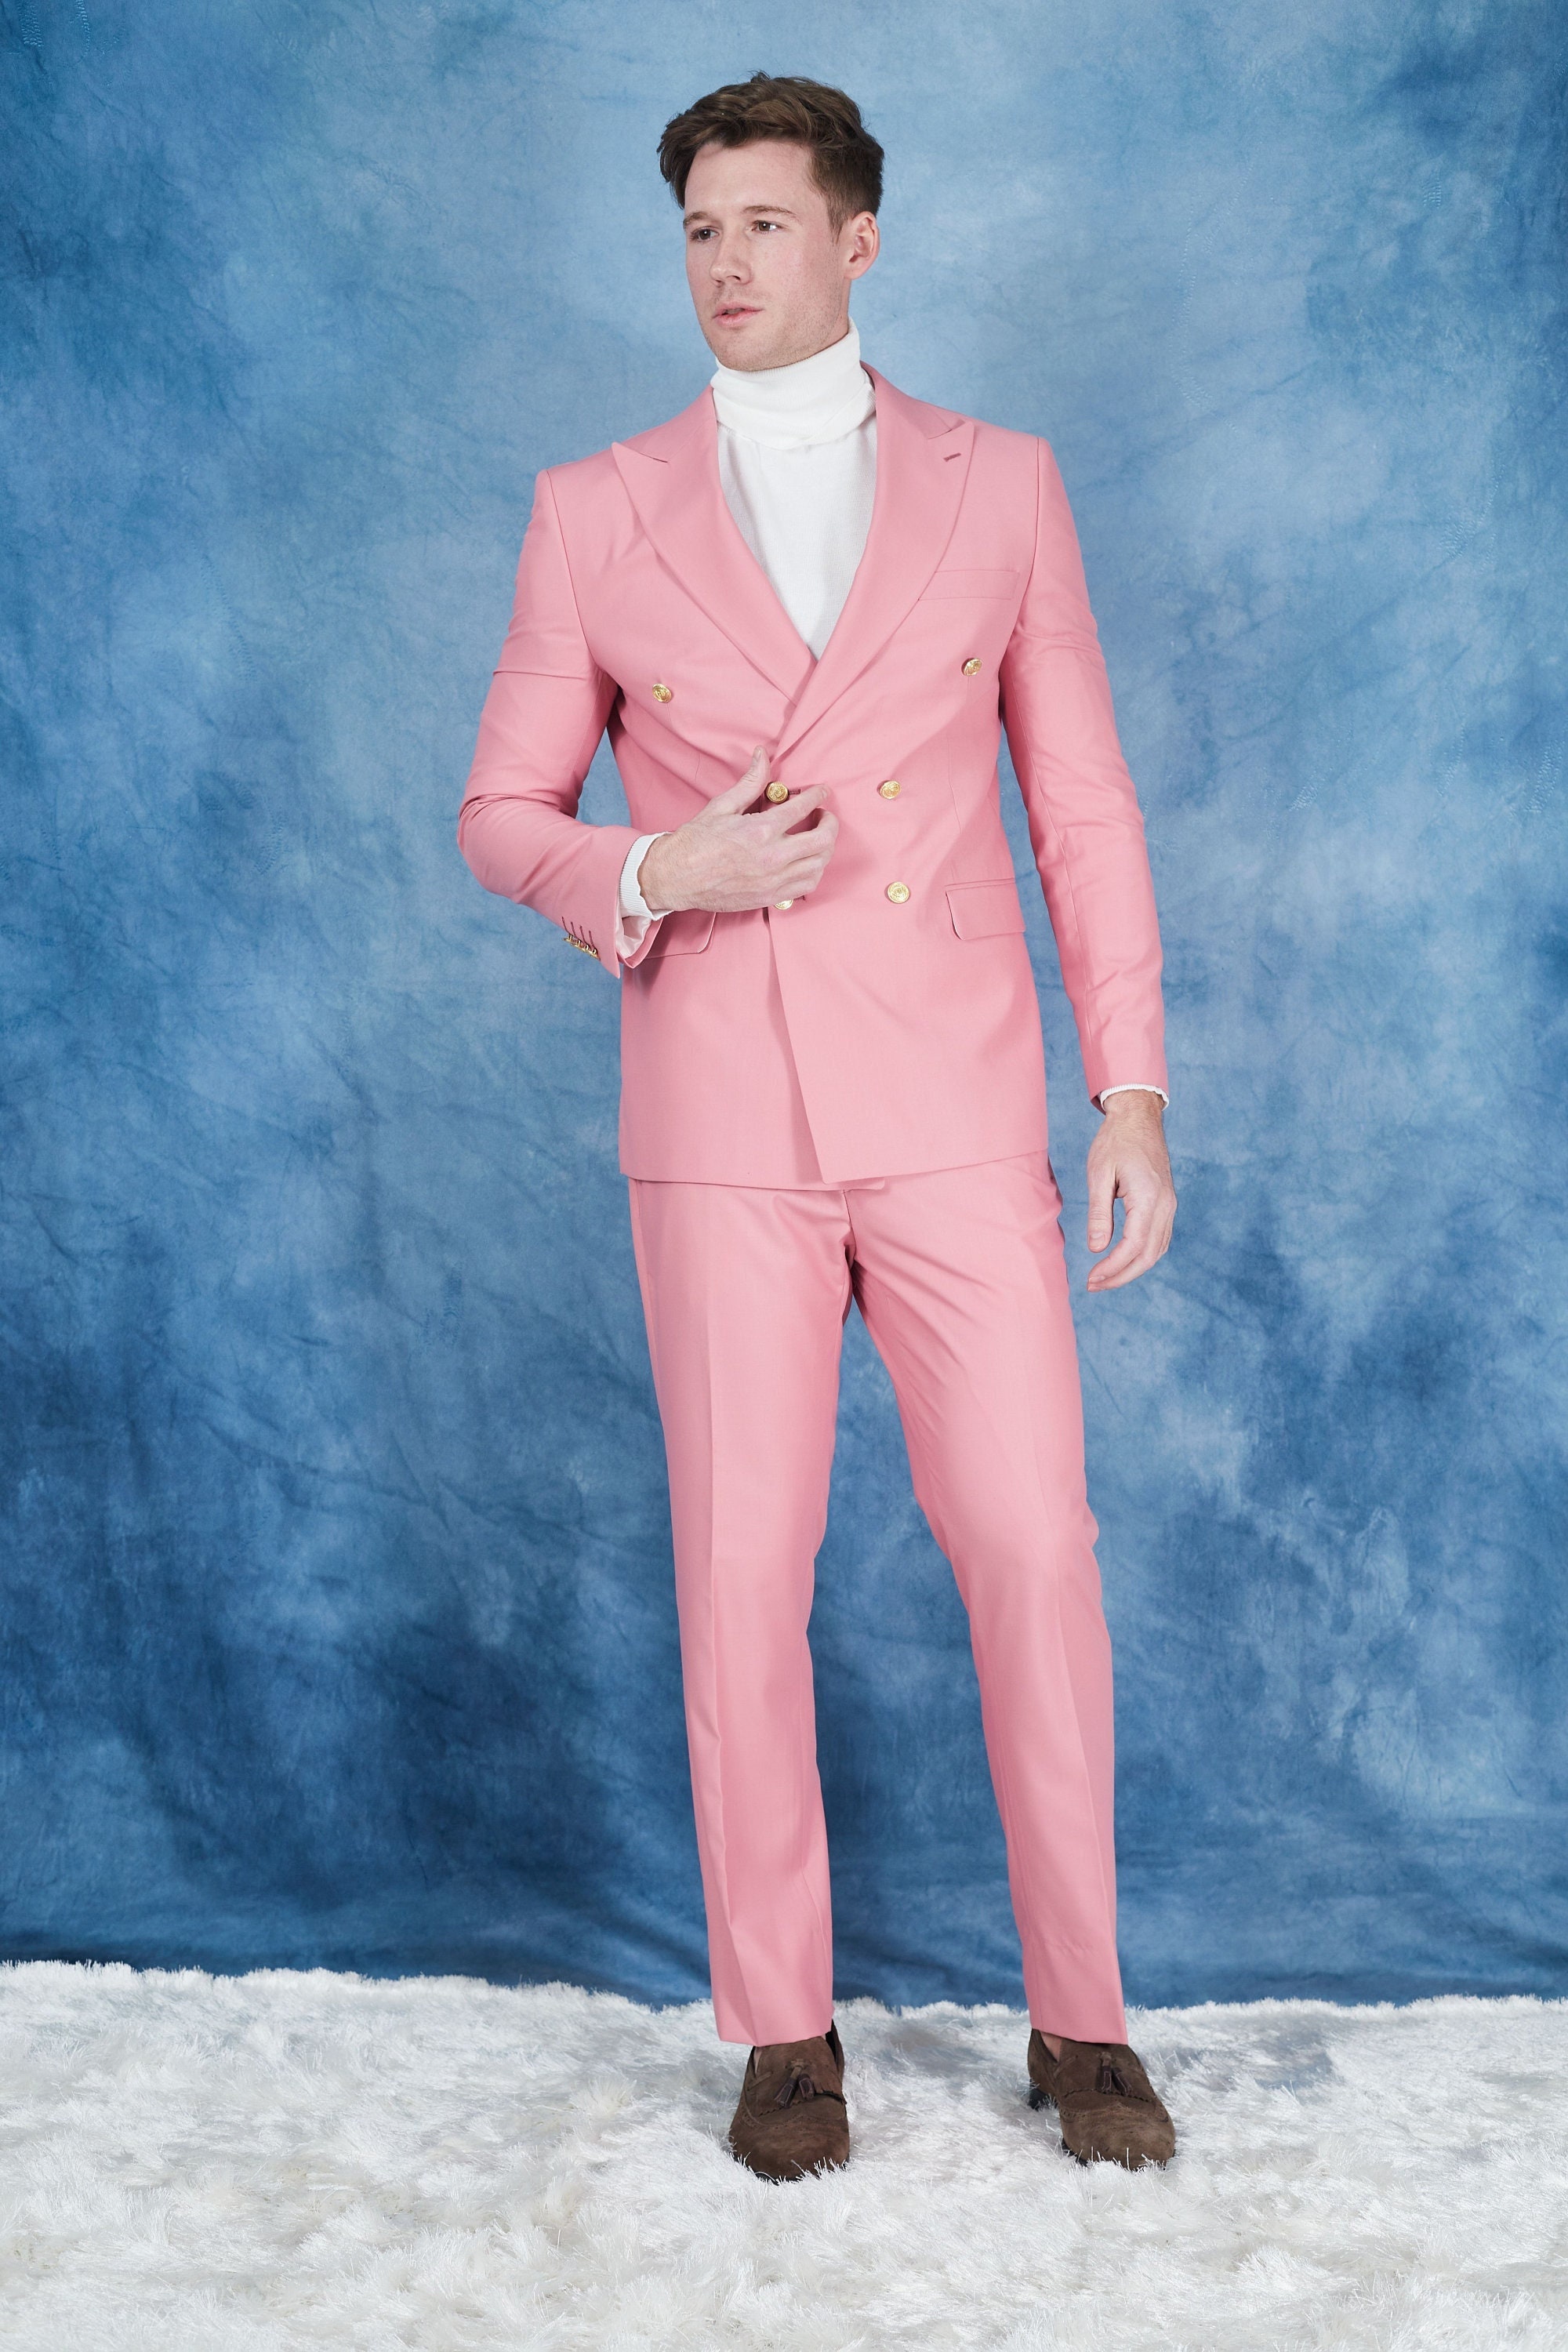 Men Suit Double Breasted Pink 2PCS Party Dinner Groom Tuxedo Wedding Formal  Suit